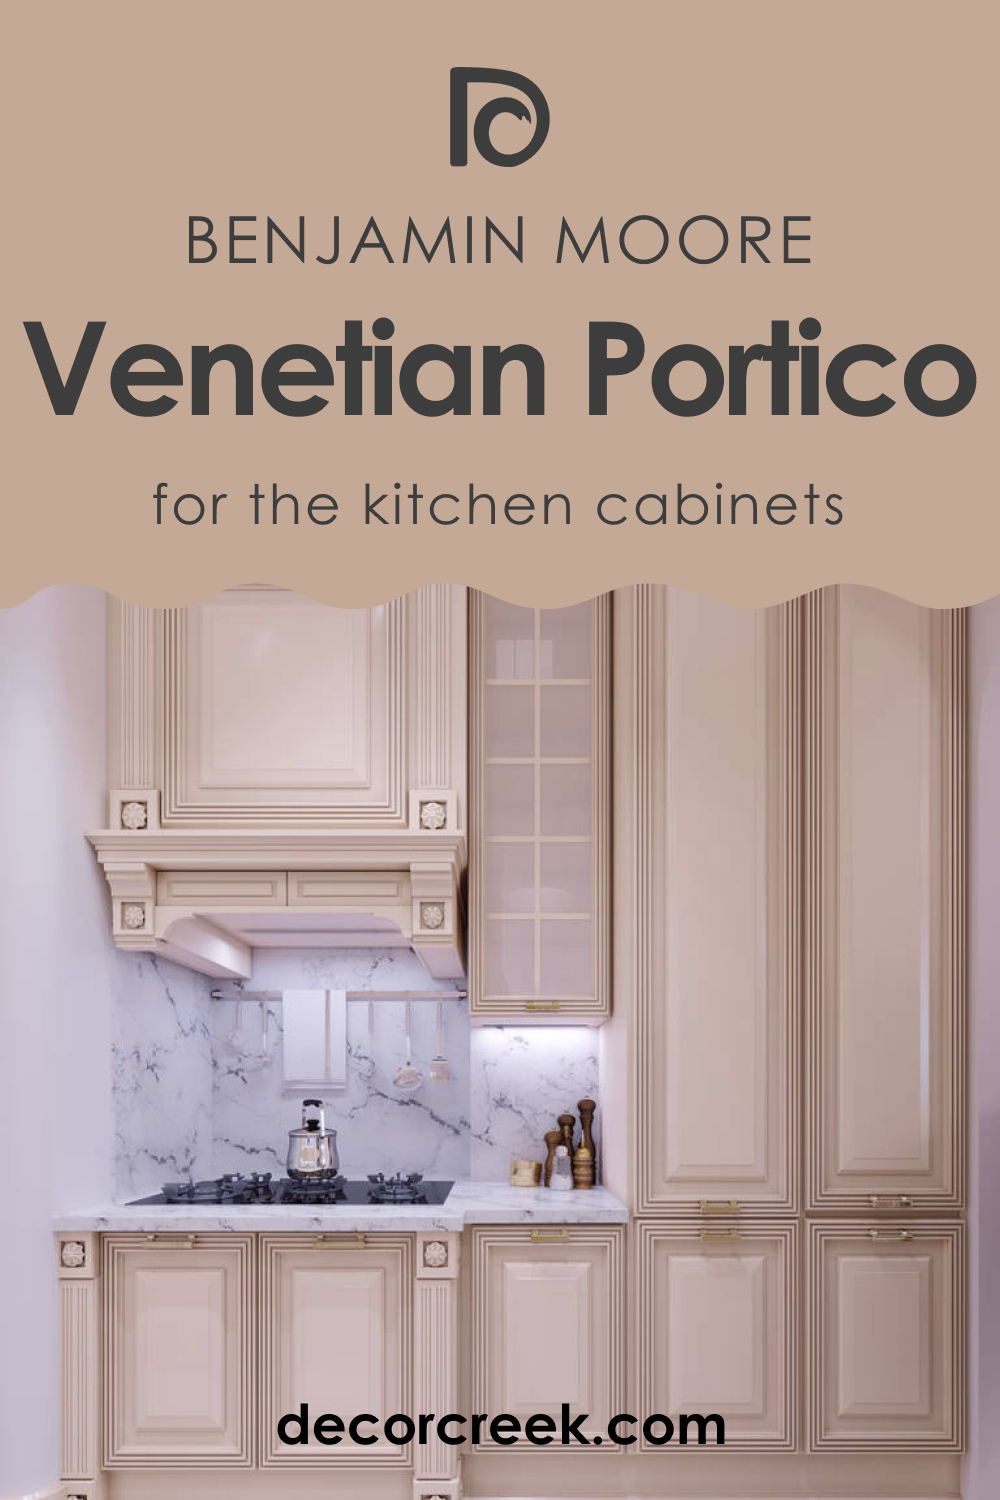 How to Use Venetian Portico AF-185 on Kitchen Cabinets?